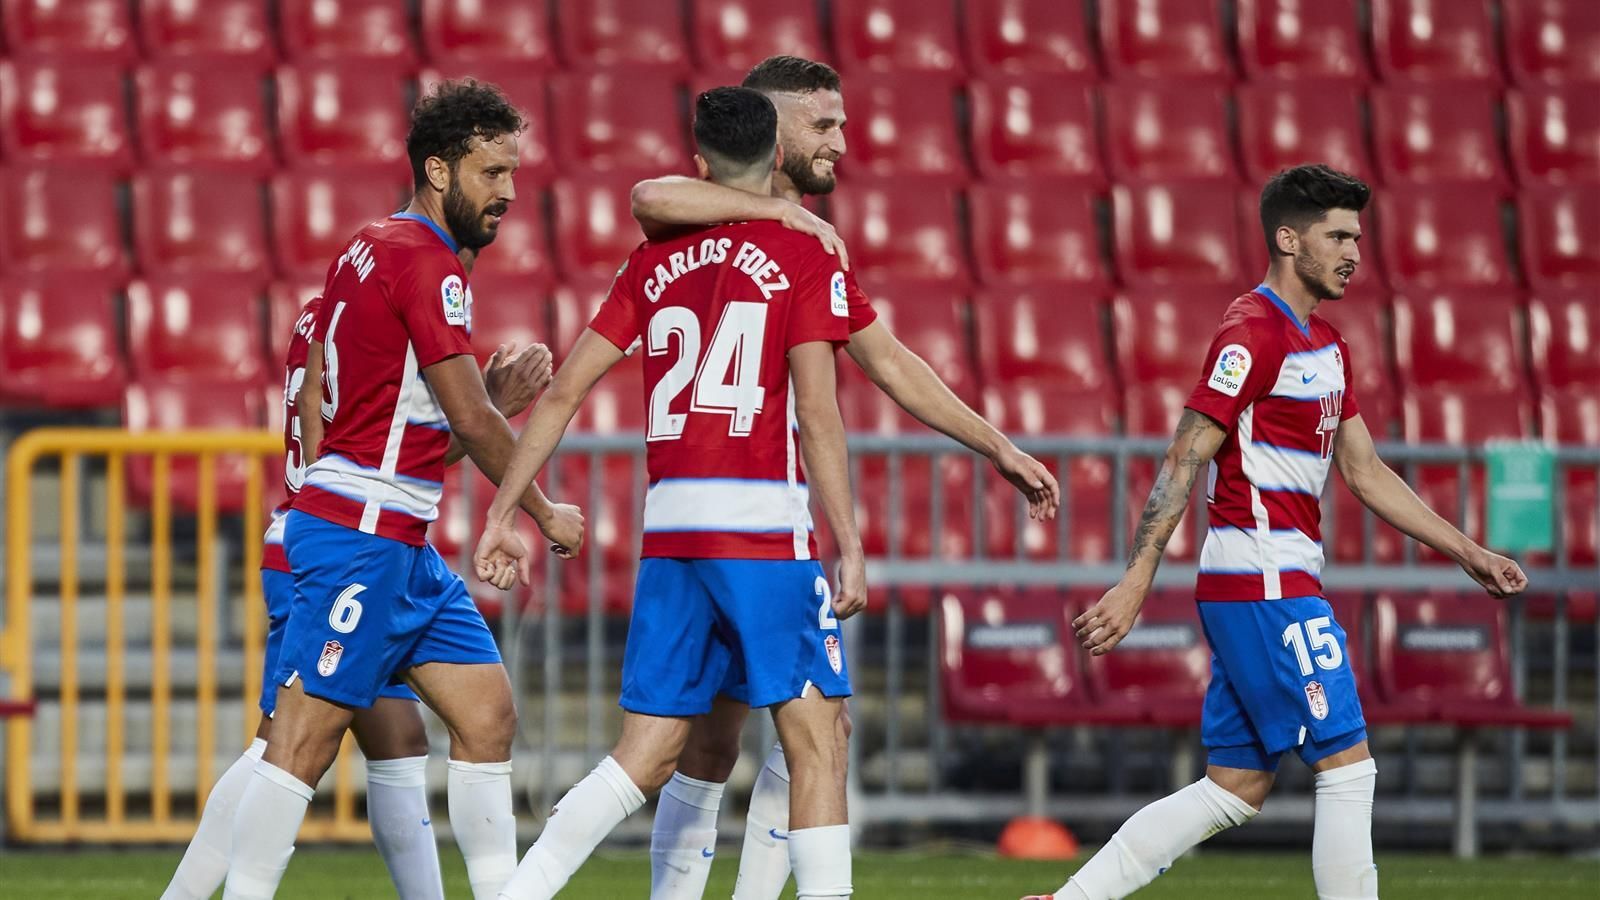 Champions League qualifying took a blow as they resumed their La Liga campaign